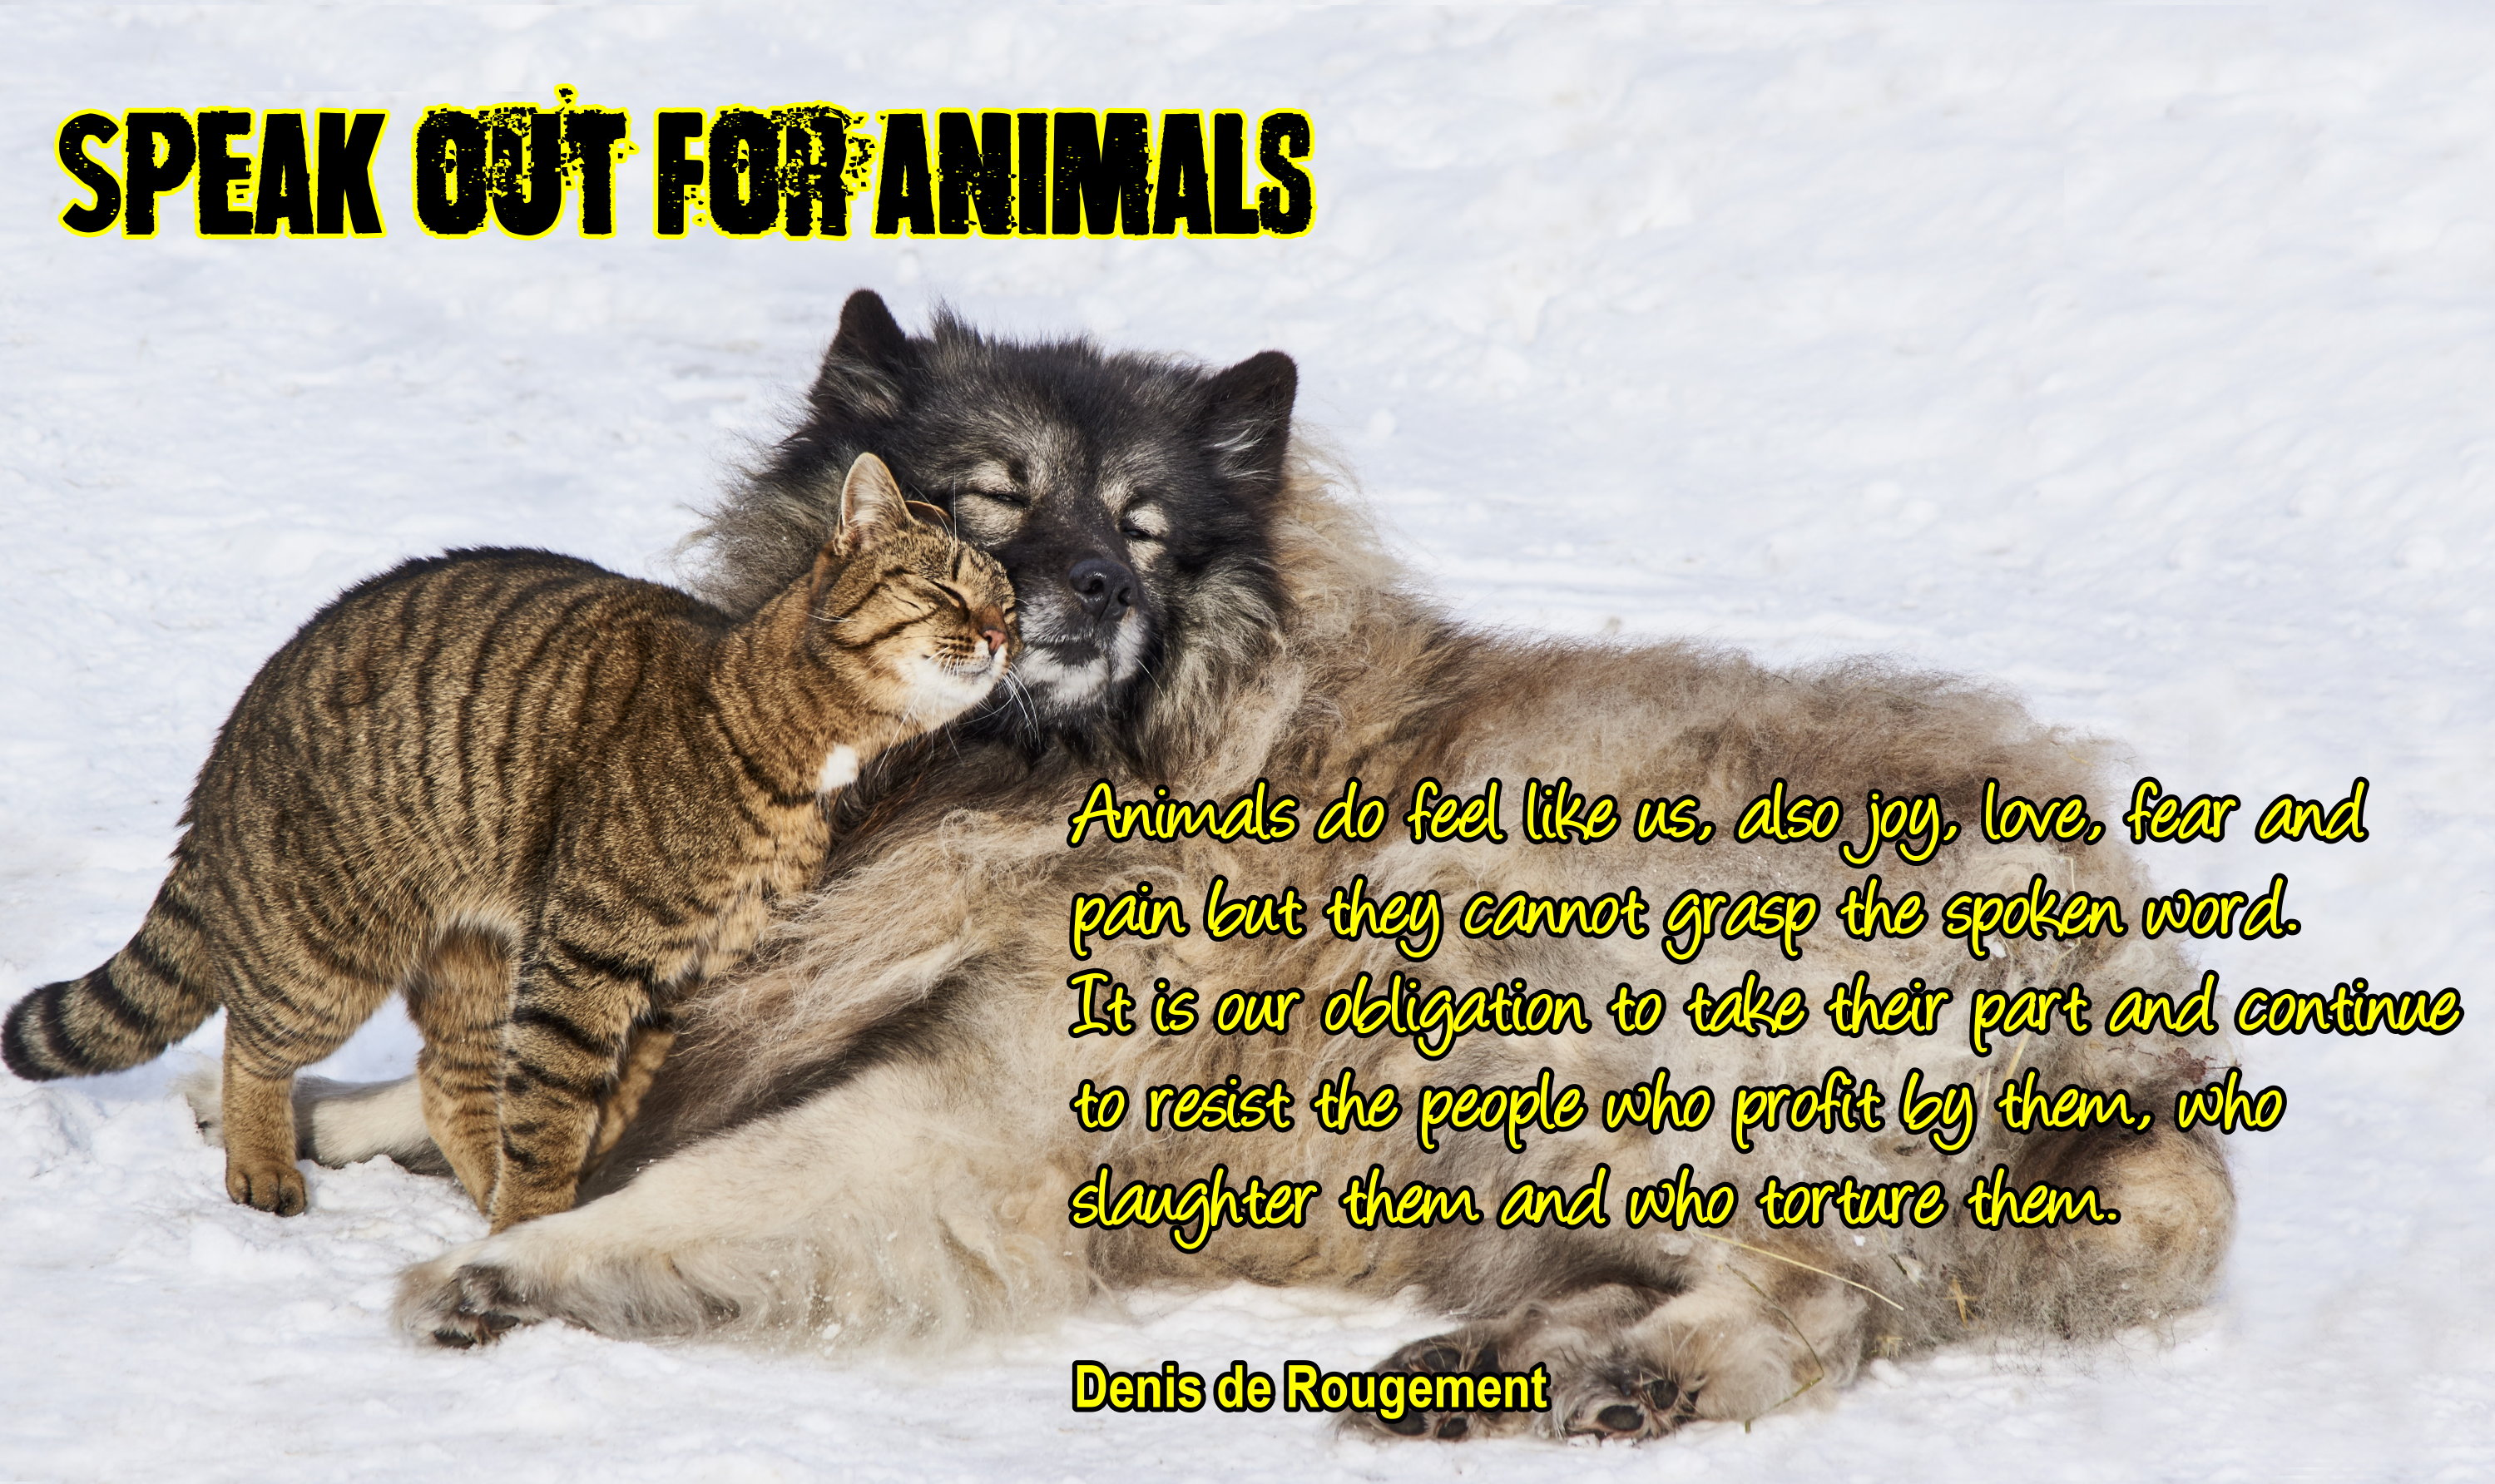 Quotations and Slogans: Animal Rights – Update two new graphics 22/01/20 |  Rantings From a Virtual Soapbox